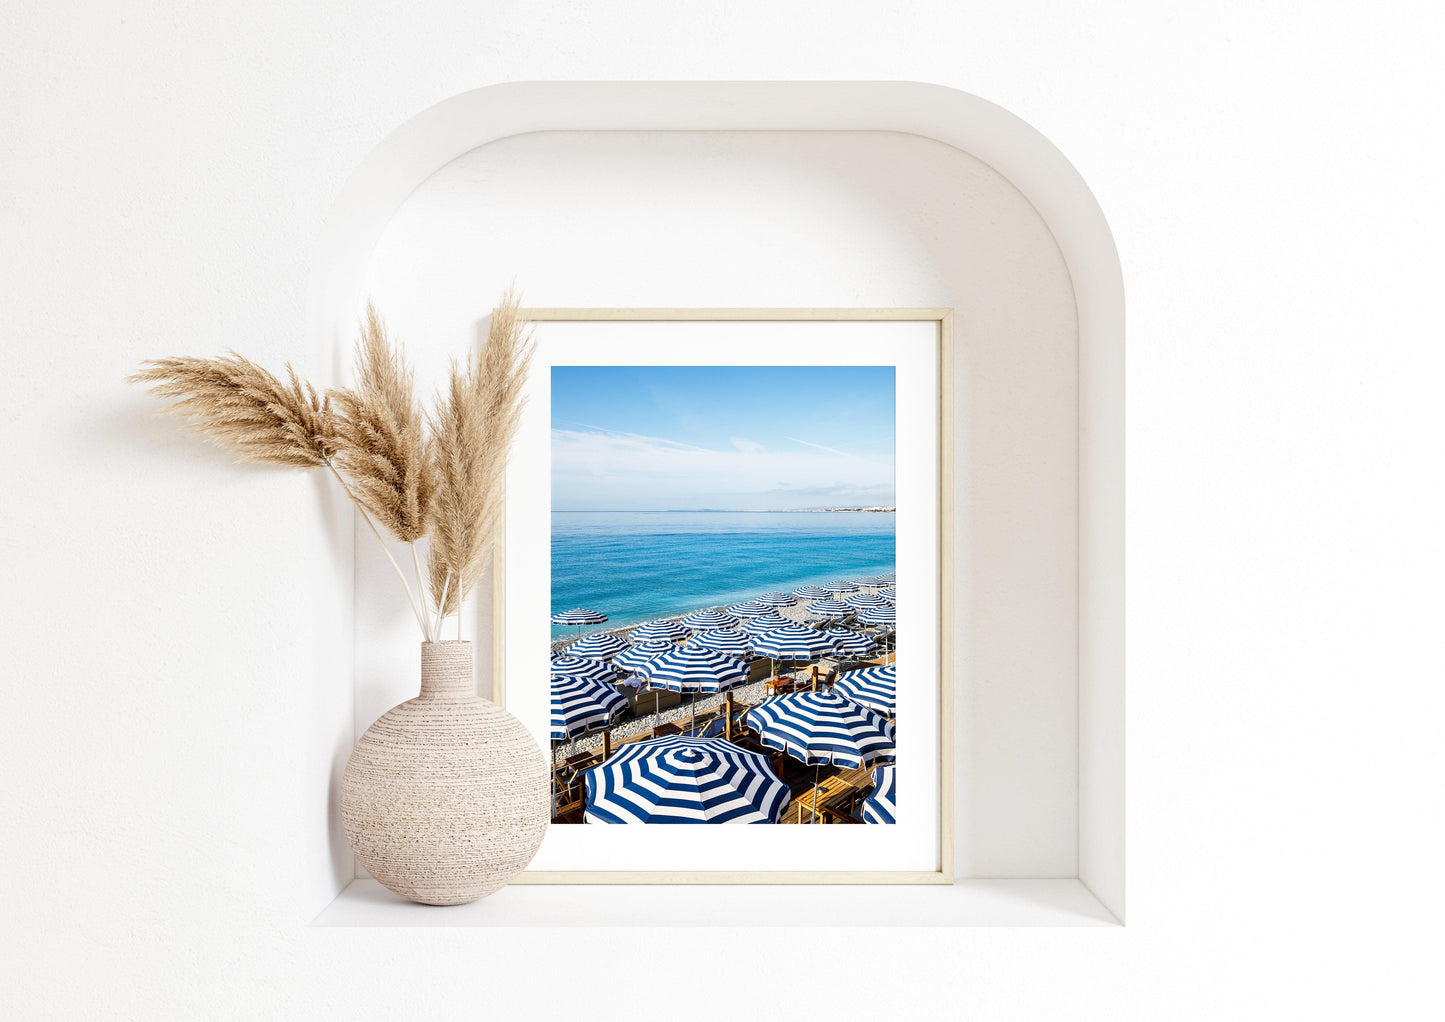 Blue and White Striped Beach Umbrellas V | French Riviera Photography Print - Departures Print Shop